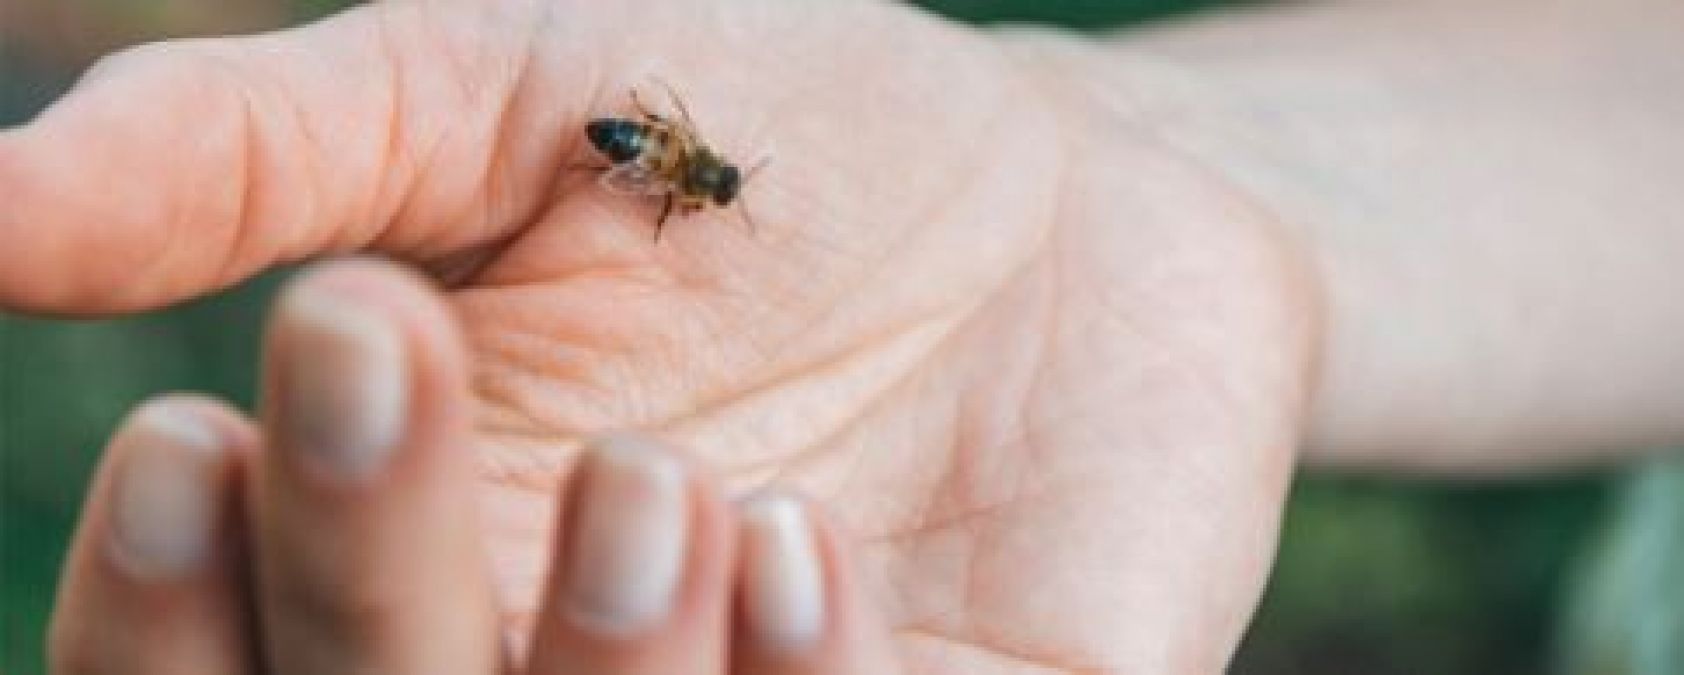 If a bee bites then do not panic, but follow these home remedies